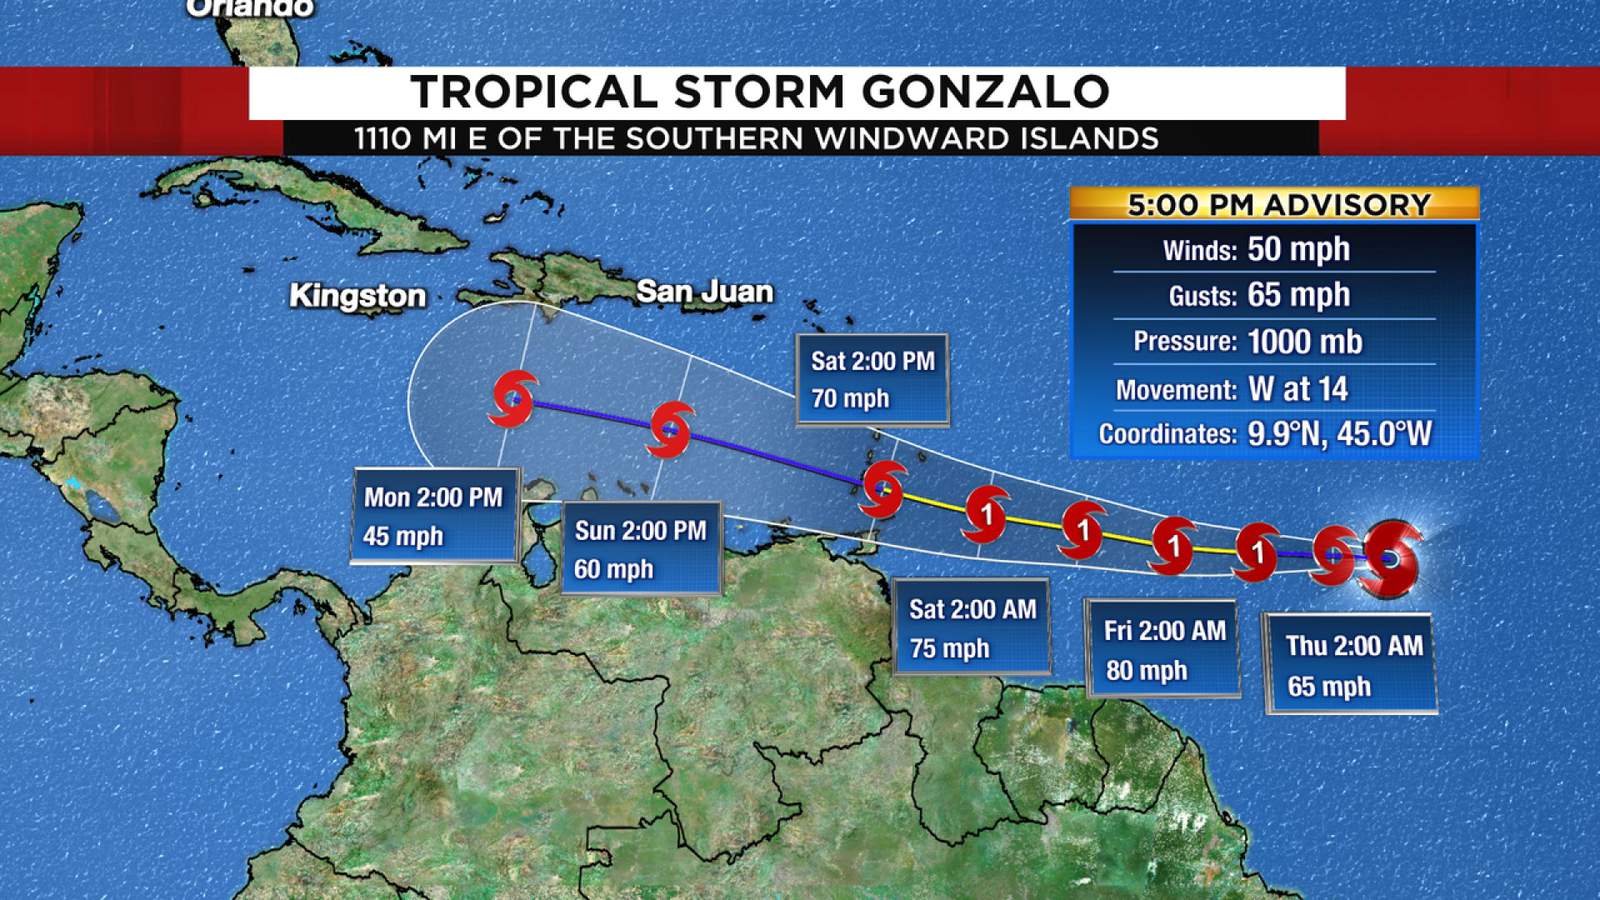 Here's the latest on Tropical Storm Gonzalo